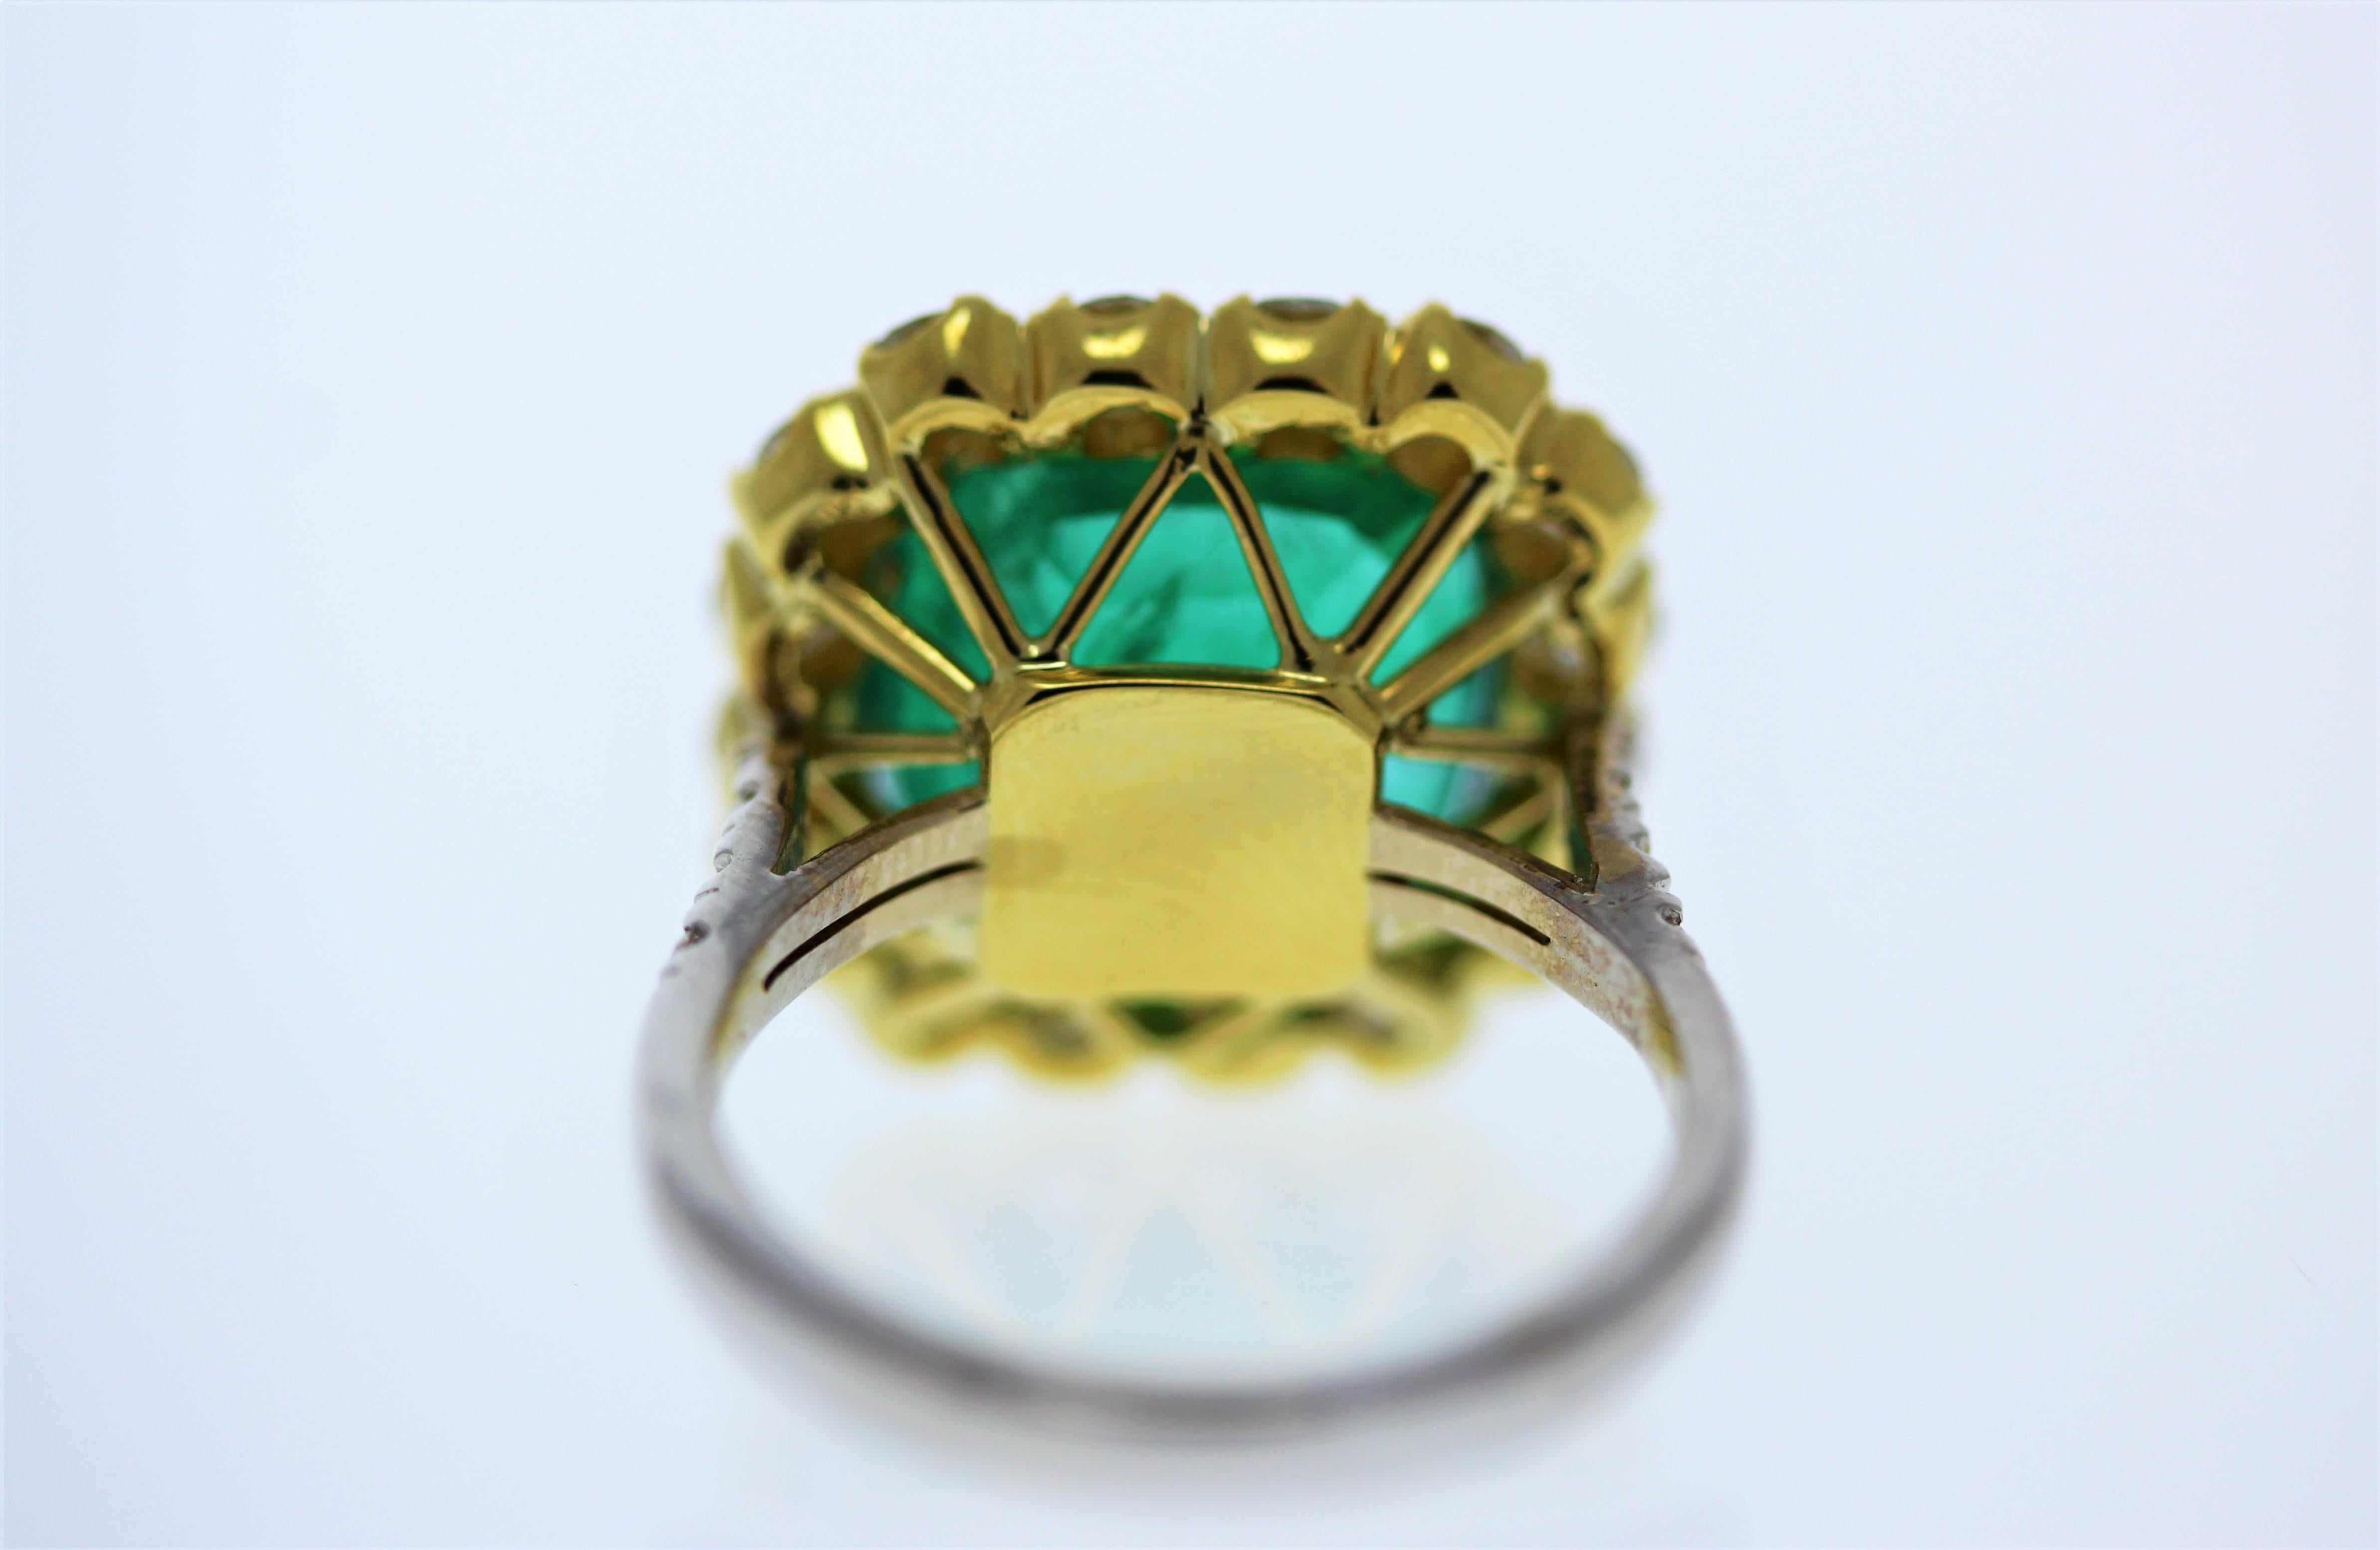 This ring features a spectacular 10.41 carats cushion cut emerald. Its origin is Zambia, its color is bright grass green. In addition to its size, the transparency and clarity make this gem sought after. The sparkle from the emerald is enhanced by a